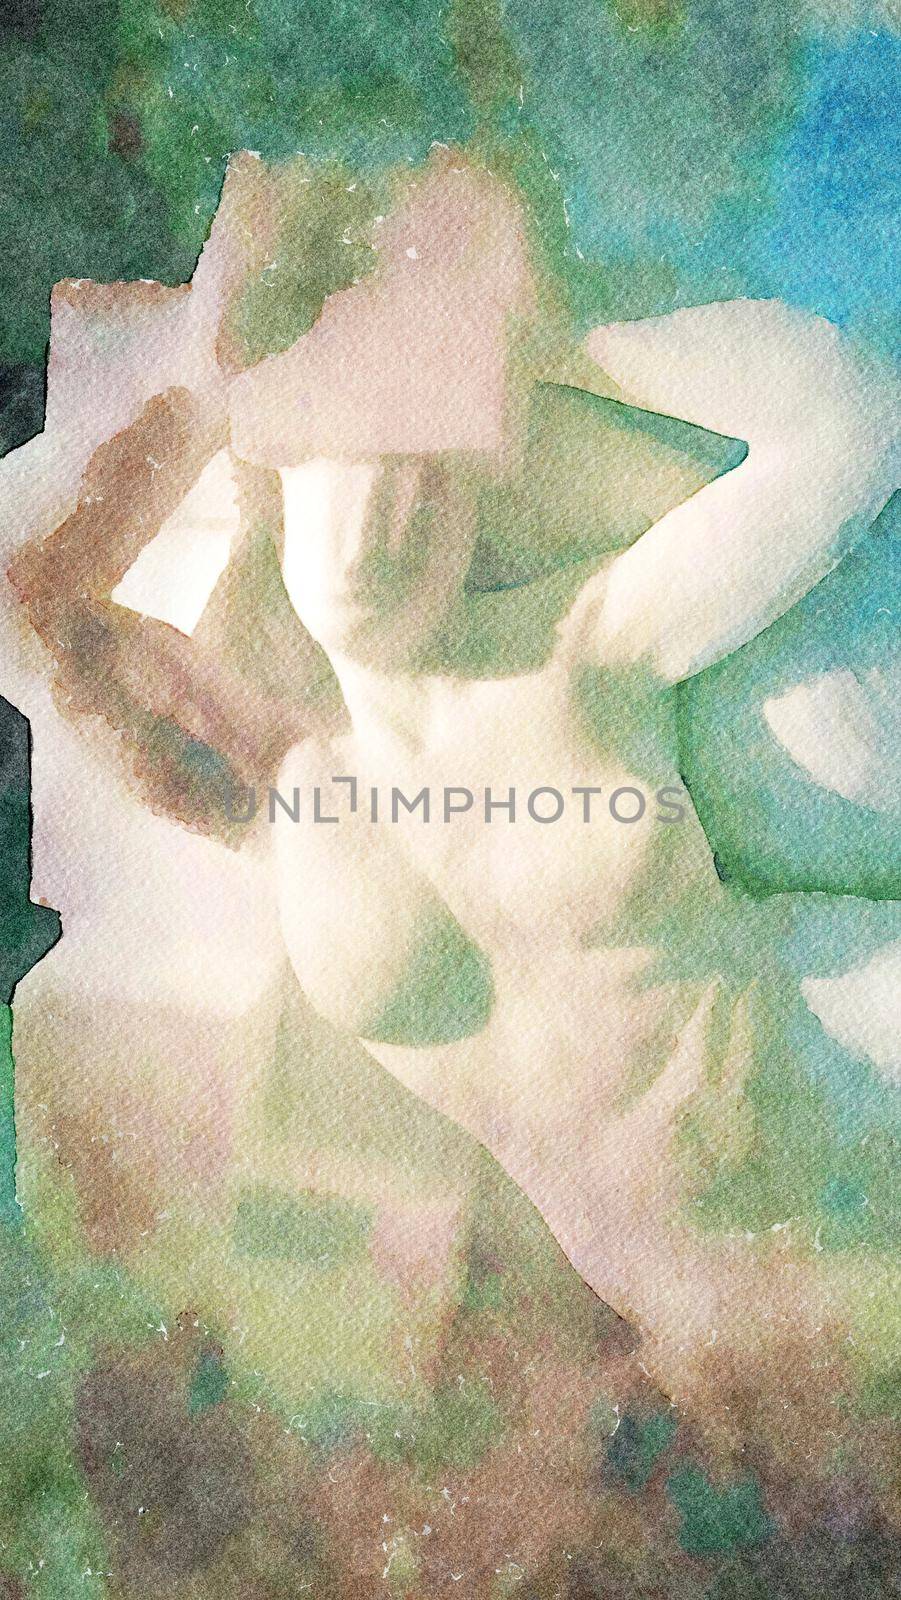 Jukkasjarvi, Sweden, February 27, 2020. one of the sculptures of the ice hotel. Digital watercolors painting.